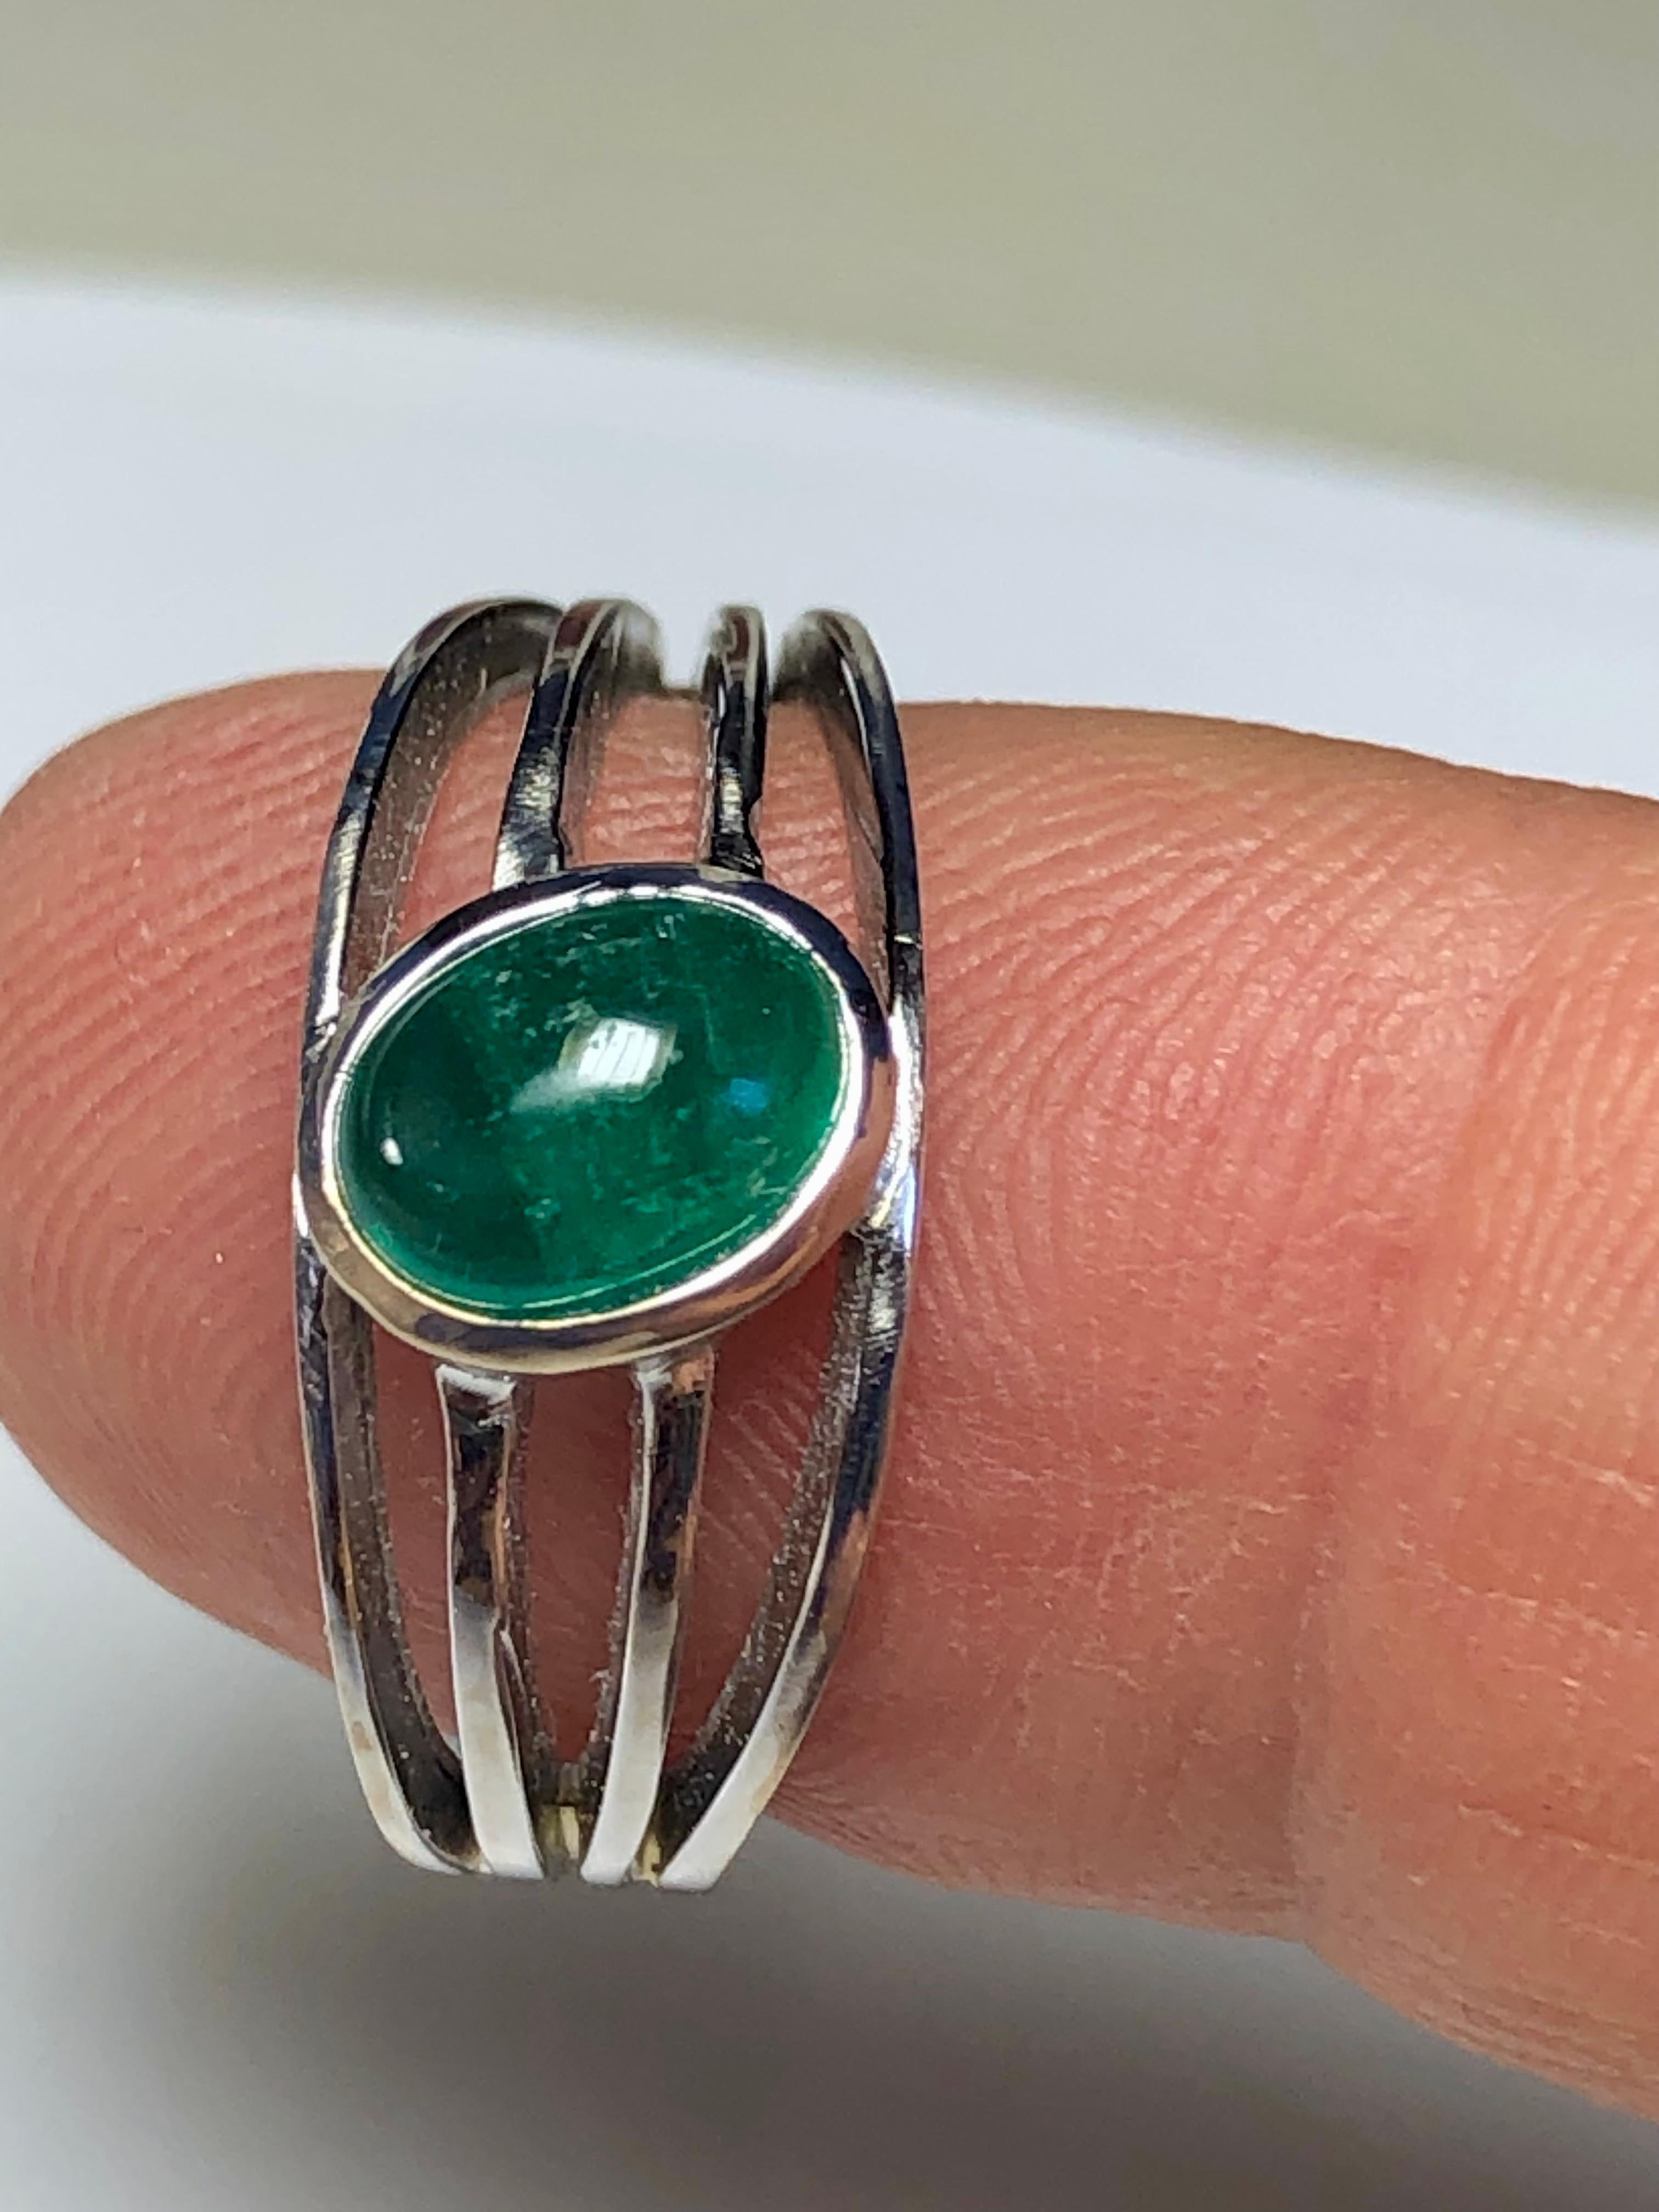 Estate Natural cabochon emerald cut vintage solitaire ring 18K White gold.  Emerald approx. weight 2.00 carats, the emerald measurements are 7mm x 6mm. Natural Medium Green.
Size: 6 
Setting: Bezel  
Estate- Very Good Condition 
